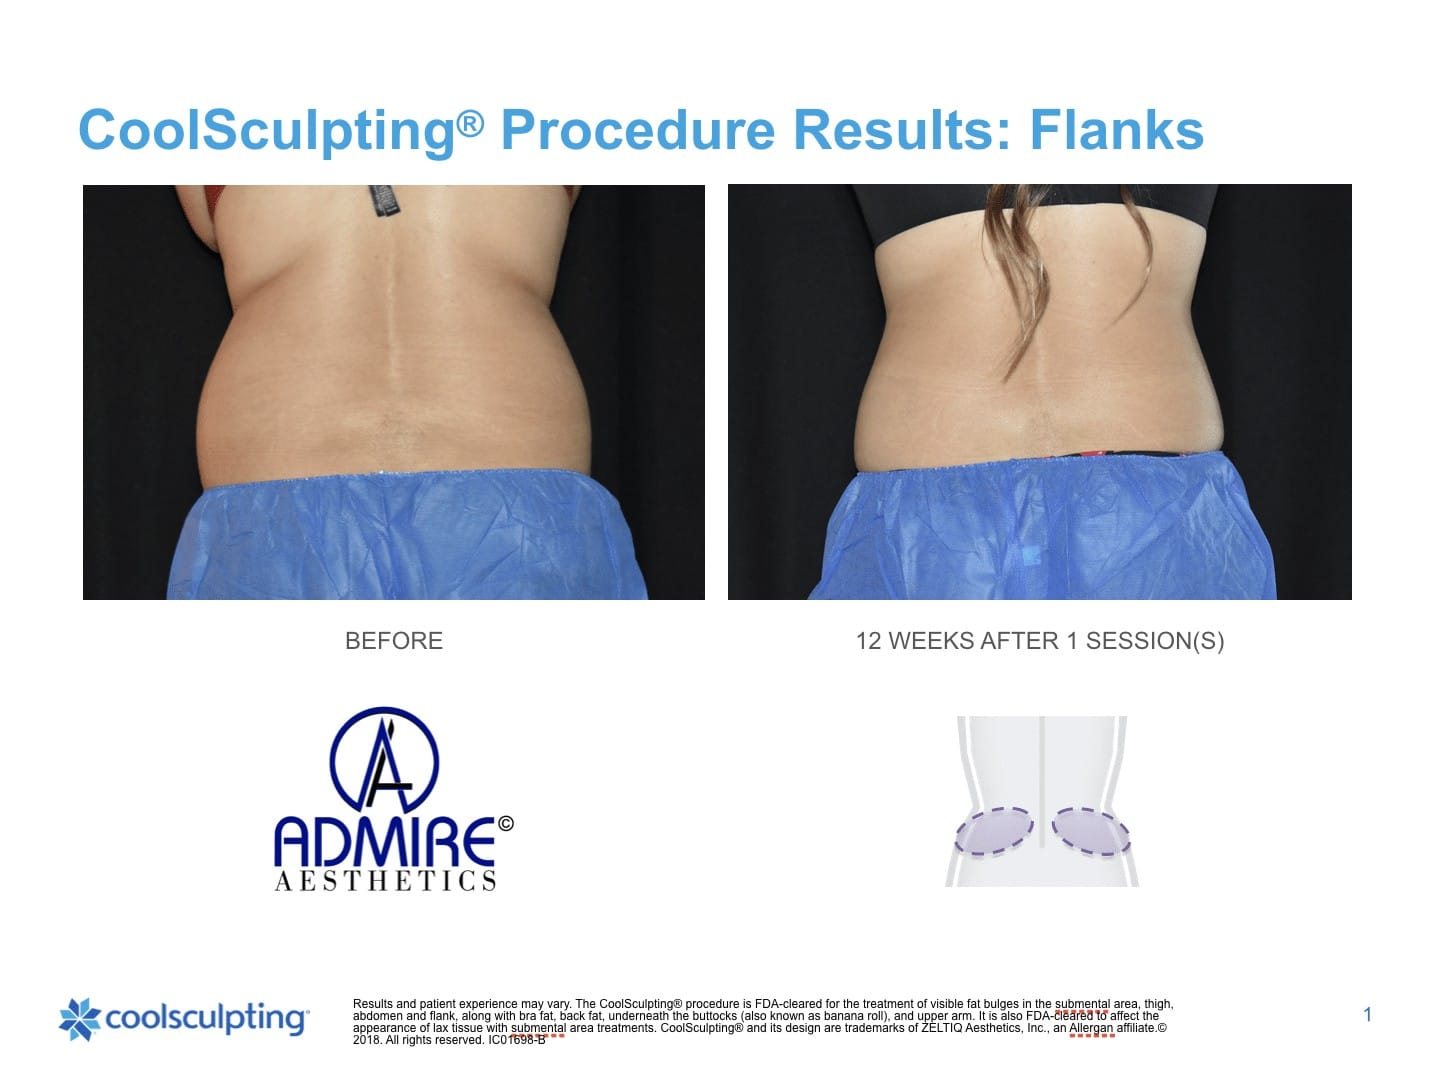 Womans back flanks before and after Coolsculpting treatment at Admire Aesthetics.